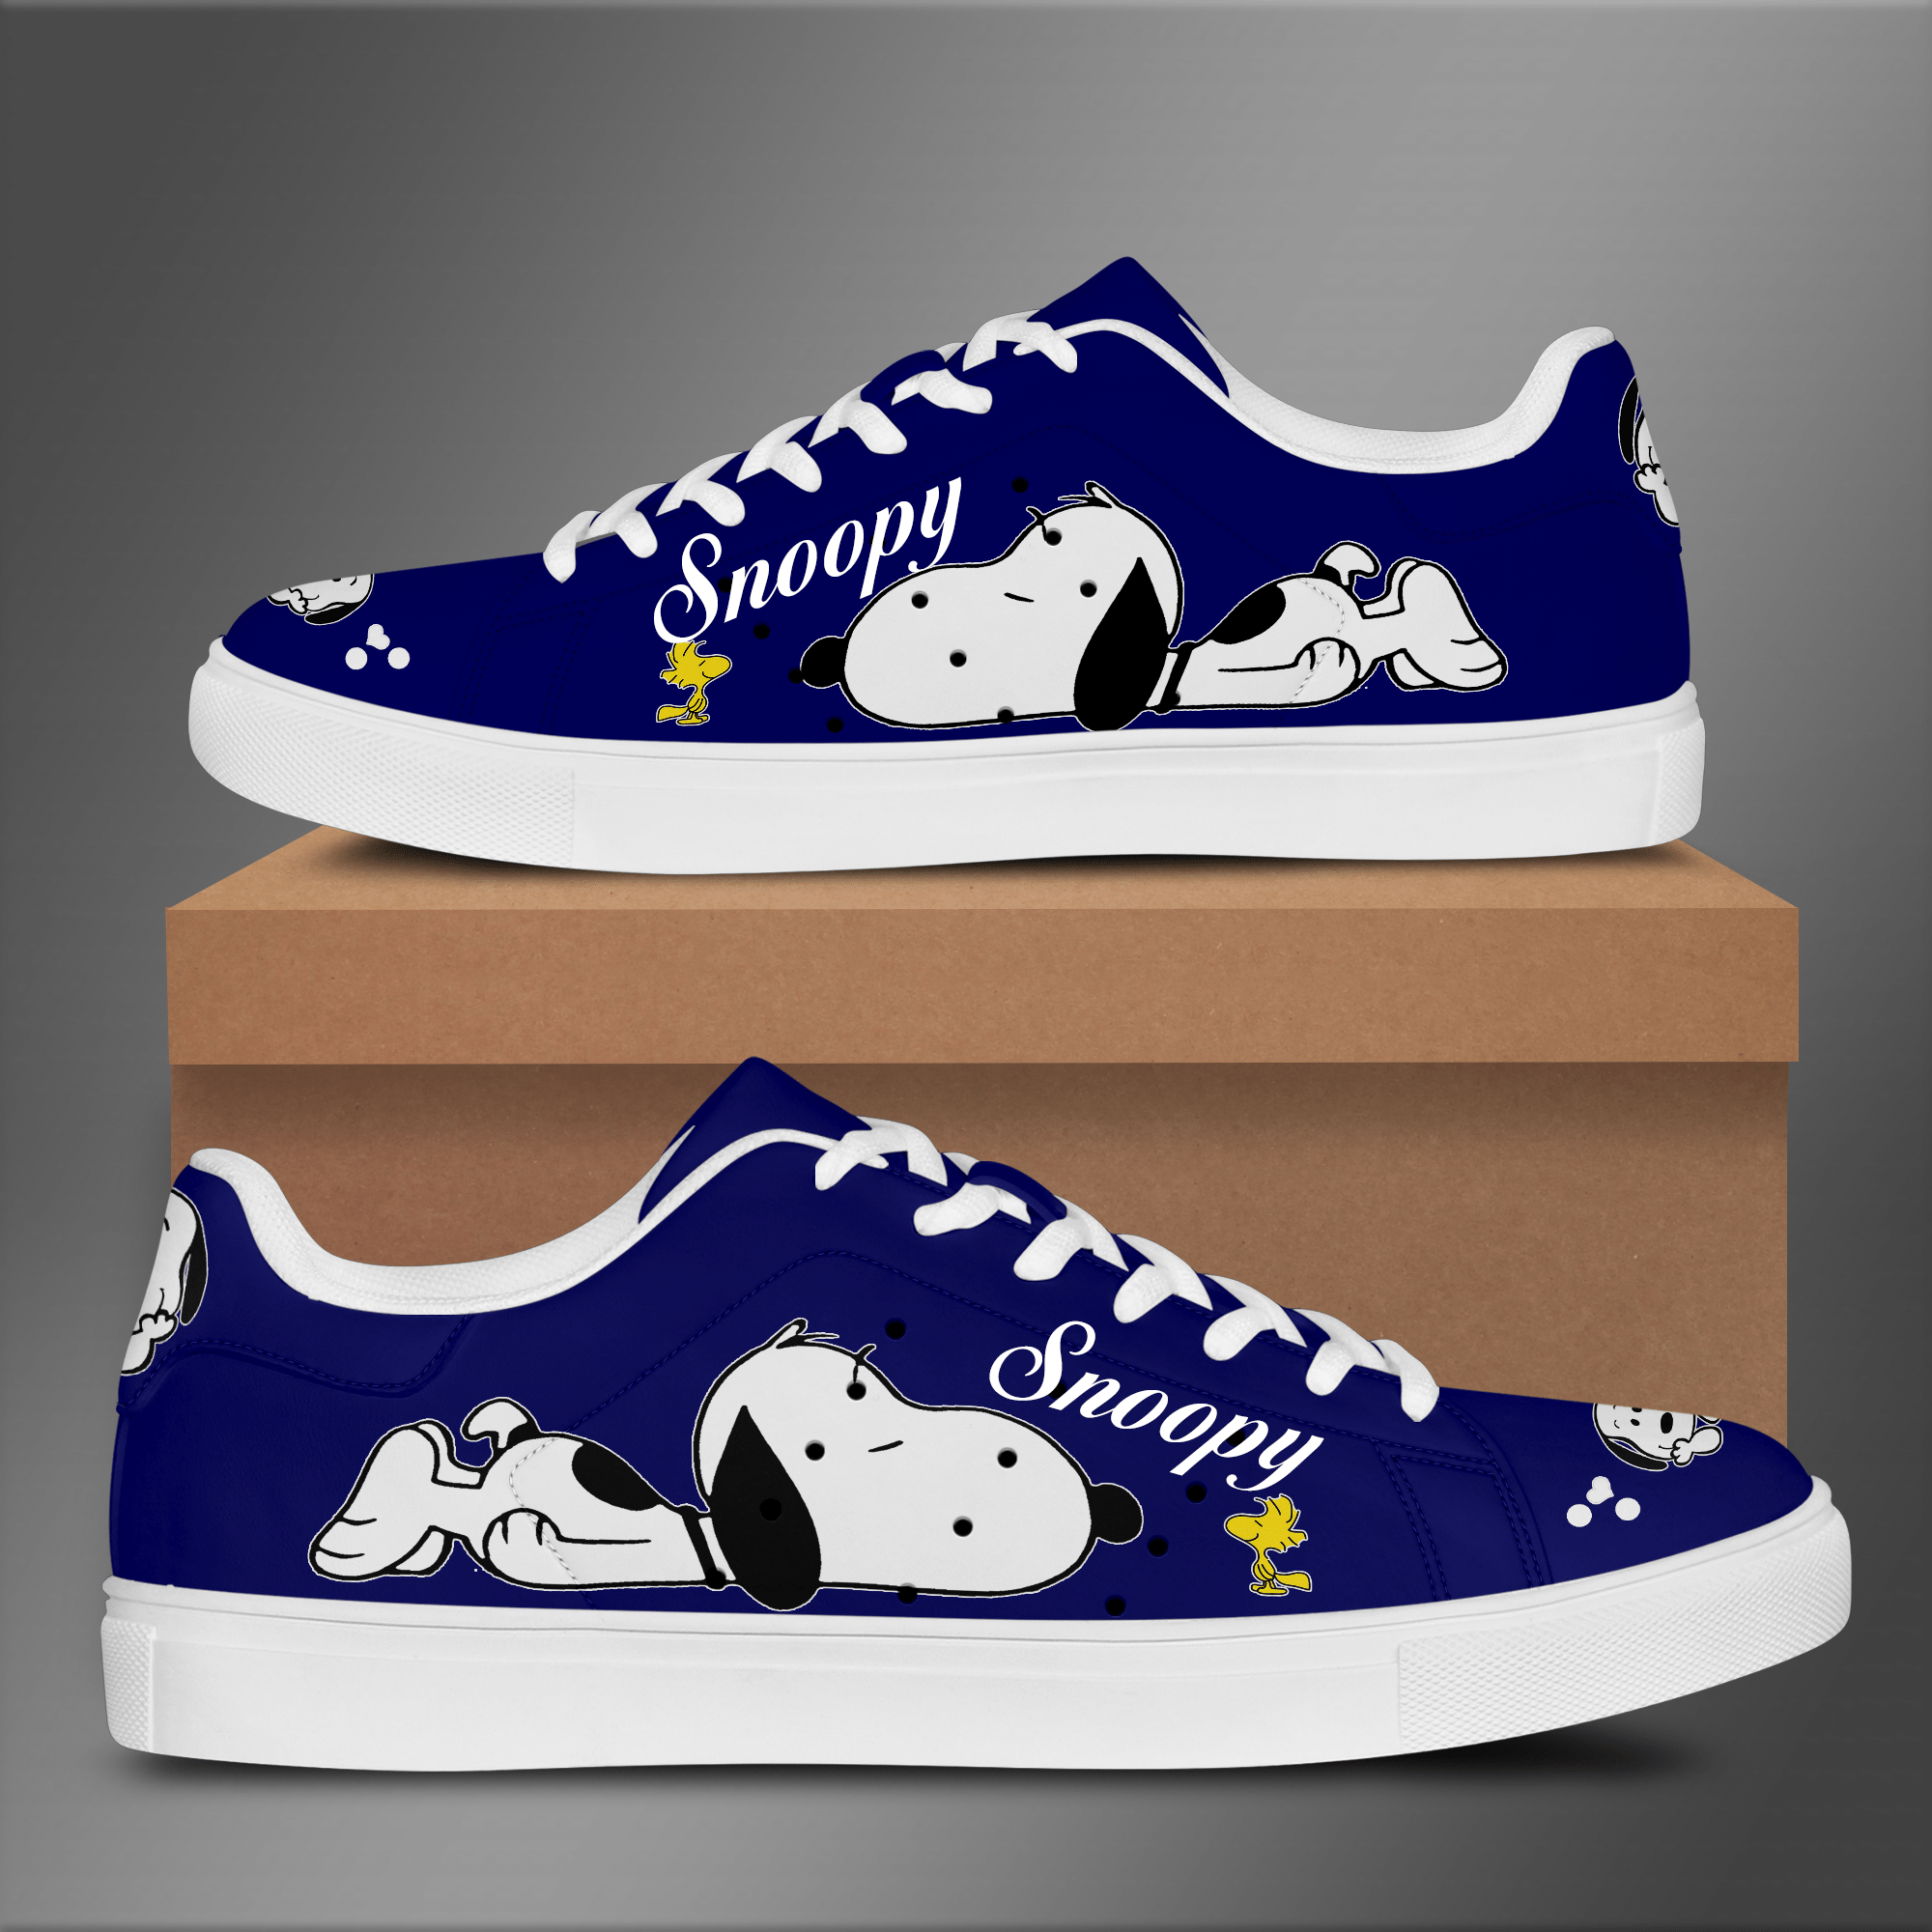 Snoopy Stan smith low top shoes 2